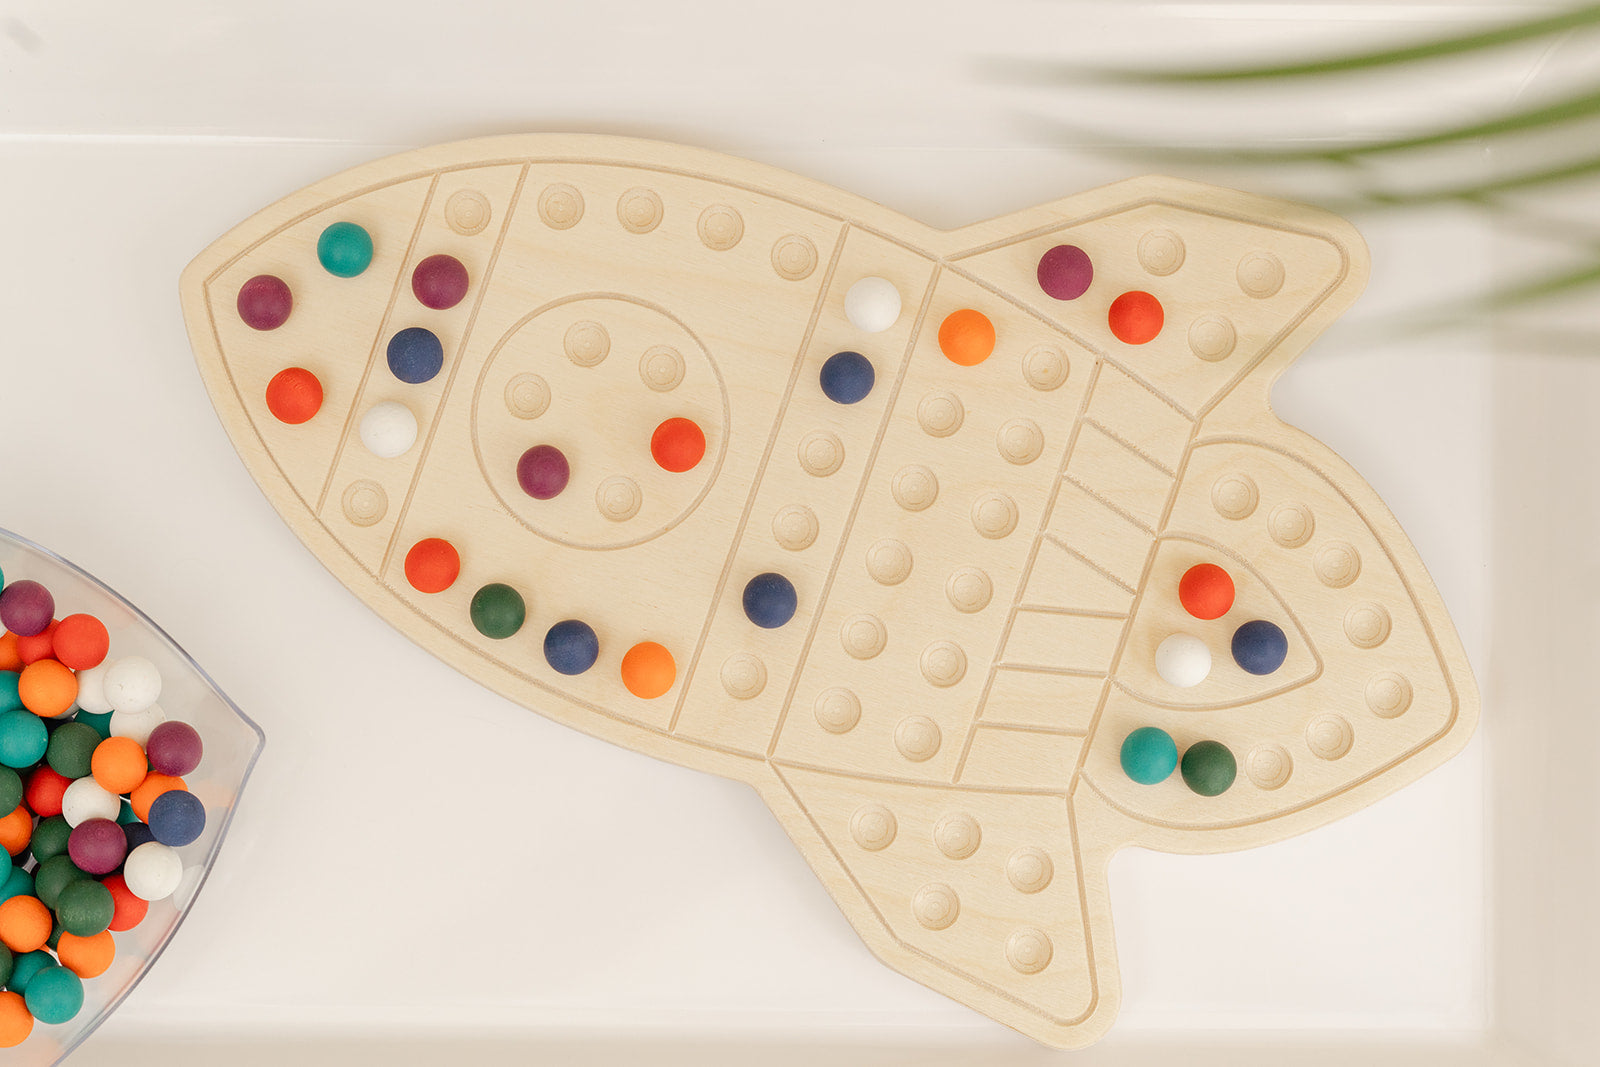 Rocketship activity board with colorful wooden balls for use by kids